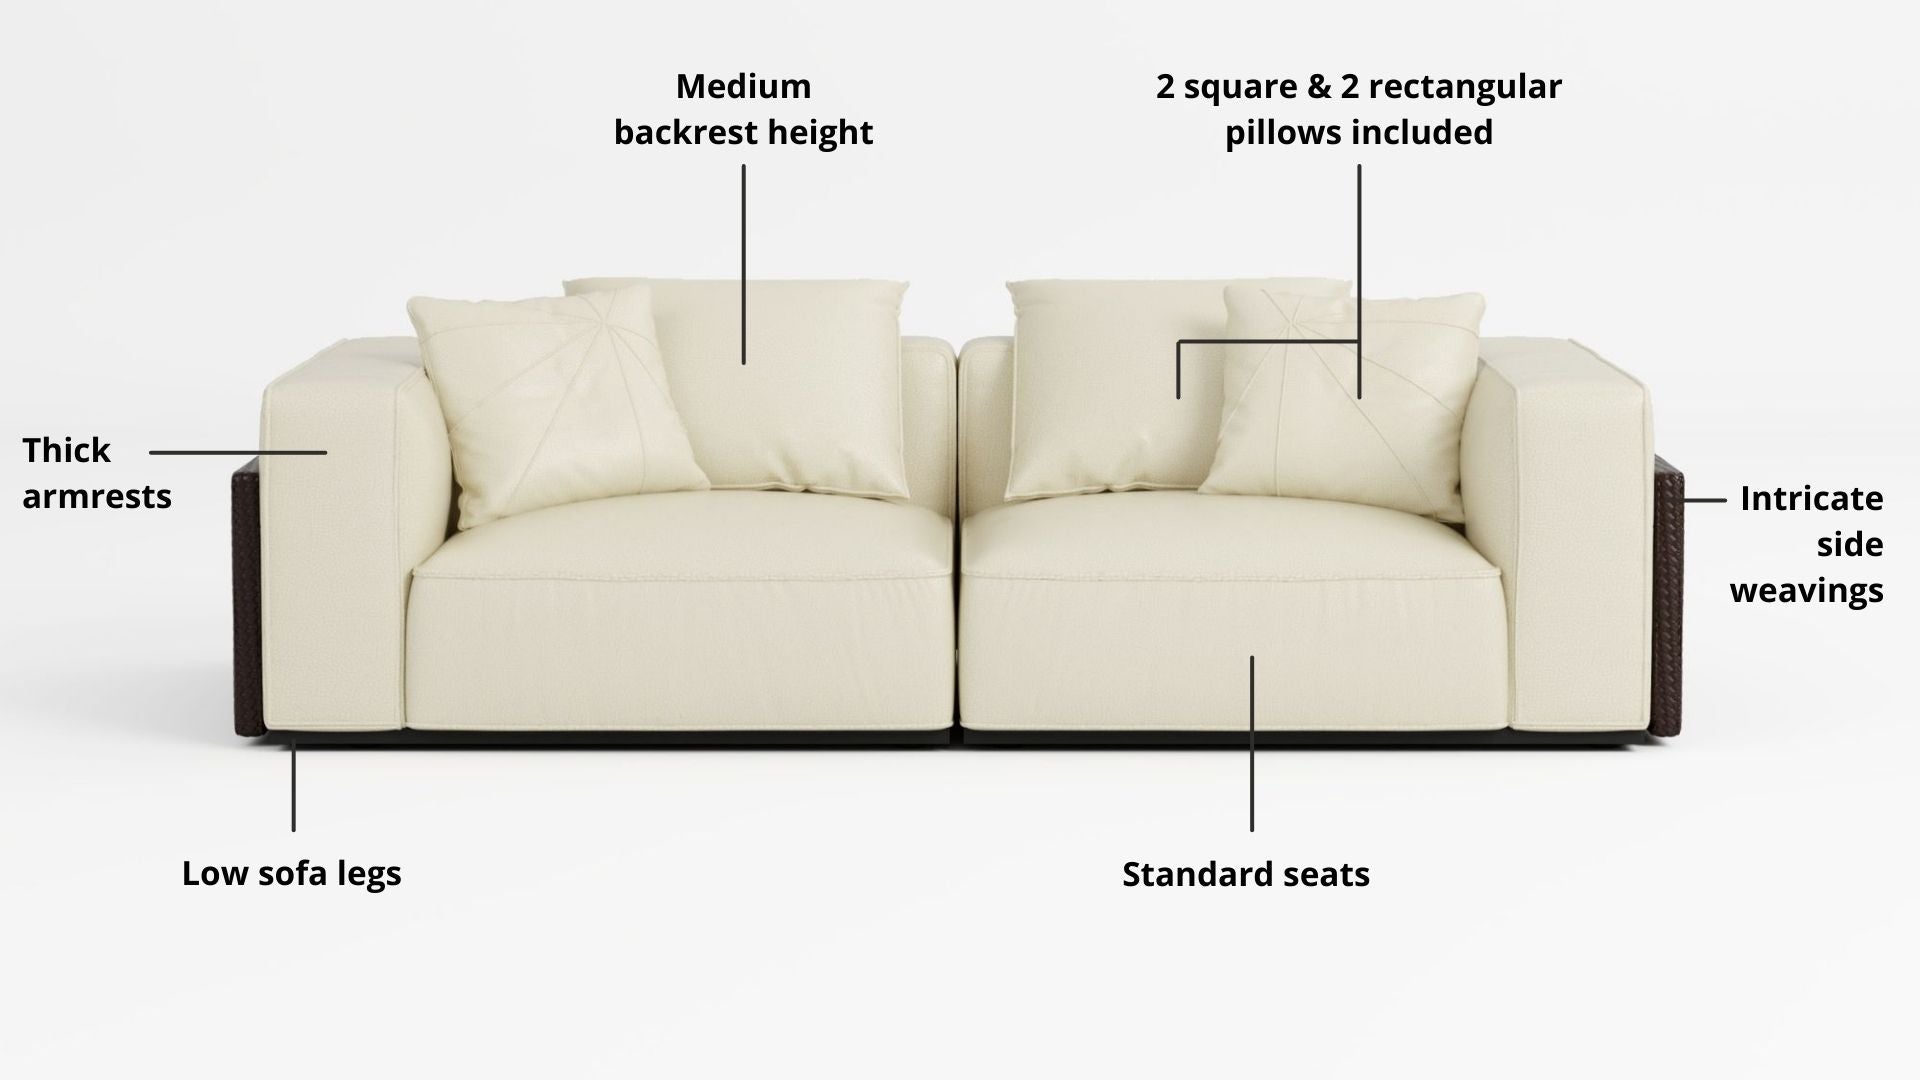 Key features such as armrest thickness, cushion height, seat depth and sofa leg height for Carson Full Leather Sofa